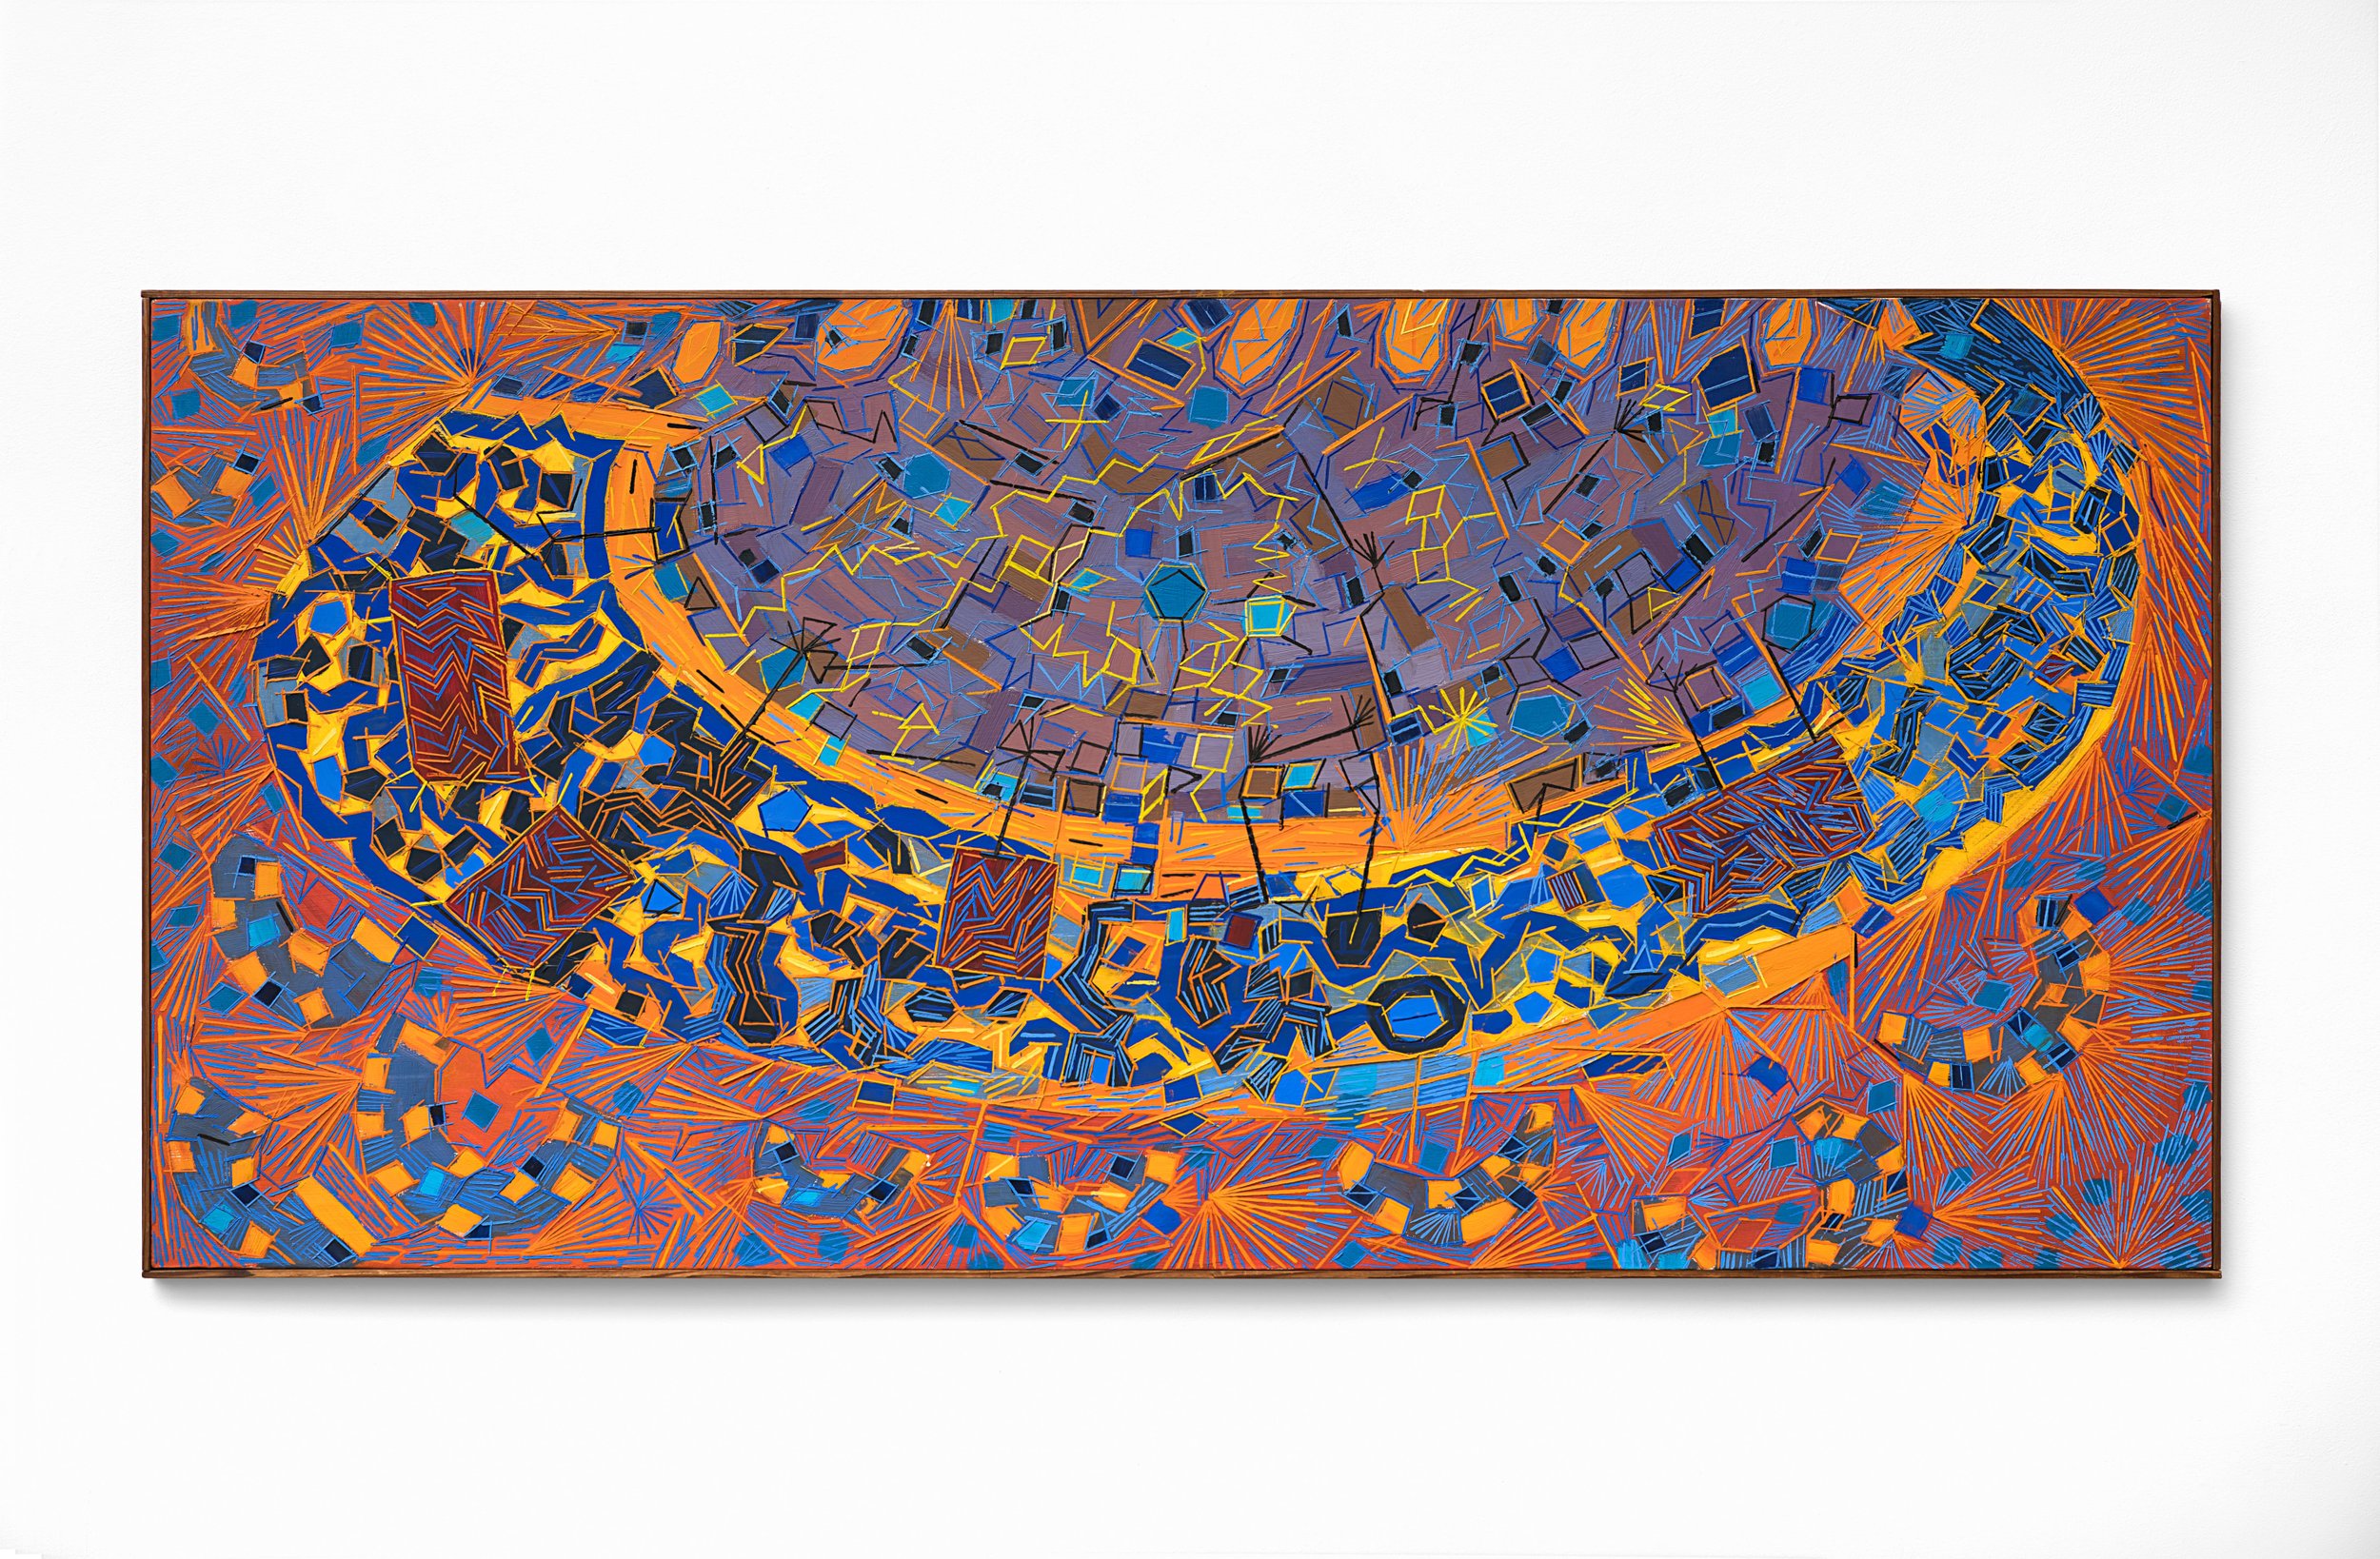 Lee Mullican (1919-1998) Universal Barque, 1969  oil on canvas 35 x 75 inches